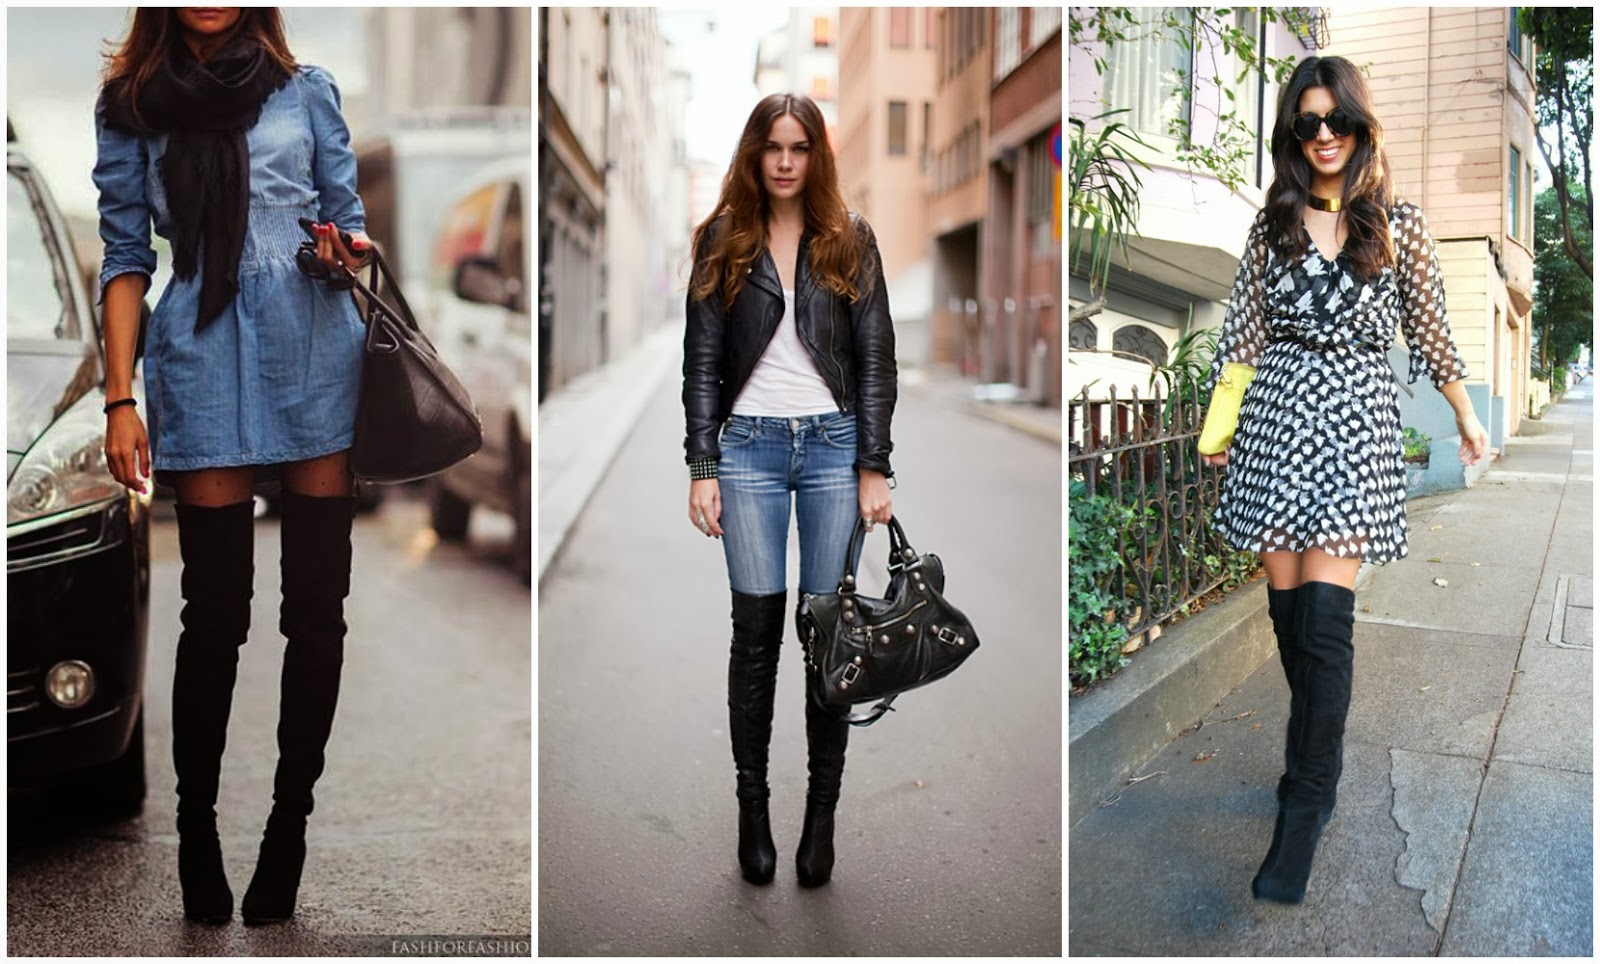 StyleFab: Keep your Boots High Like Your Standards! – Legally FAB